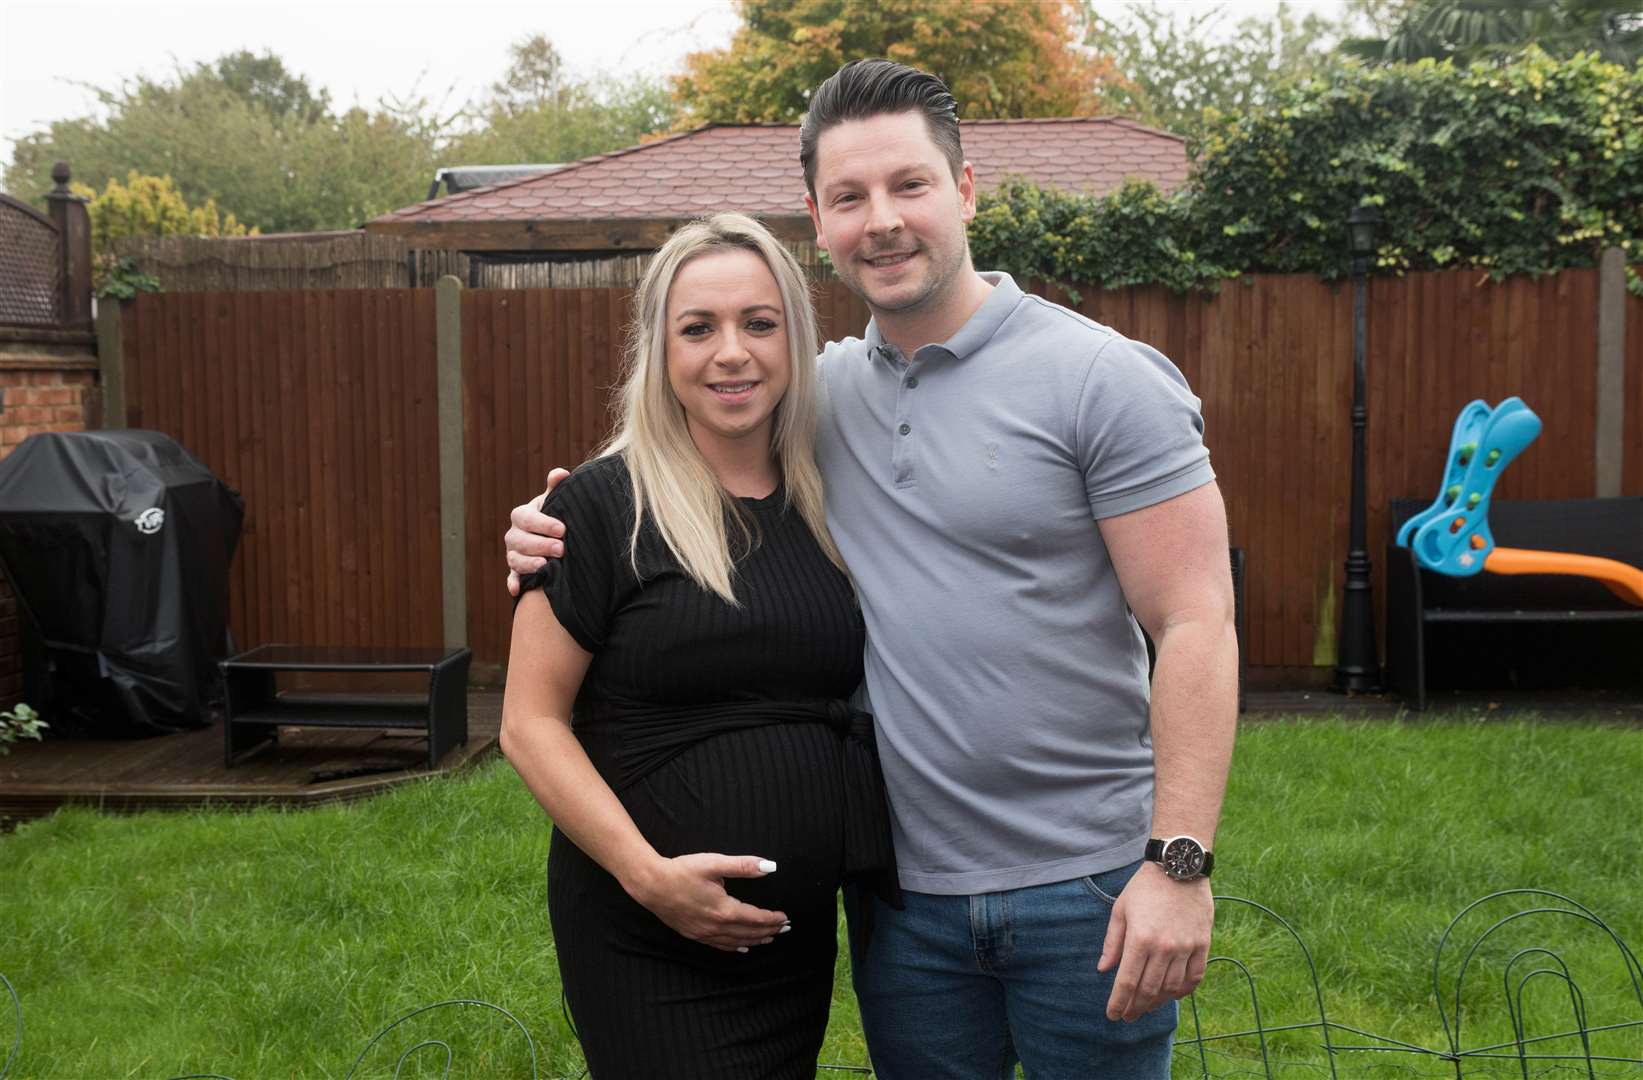 Tamsin and Craig plan to get married after birth of their third child